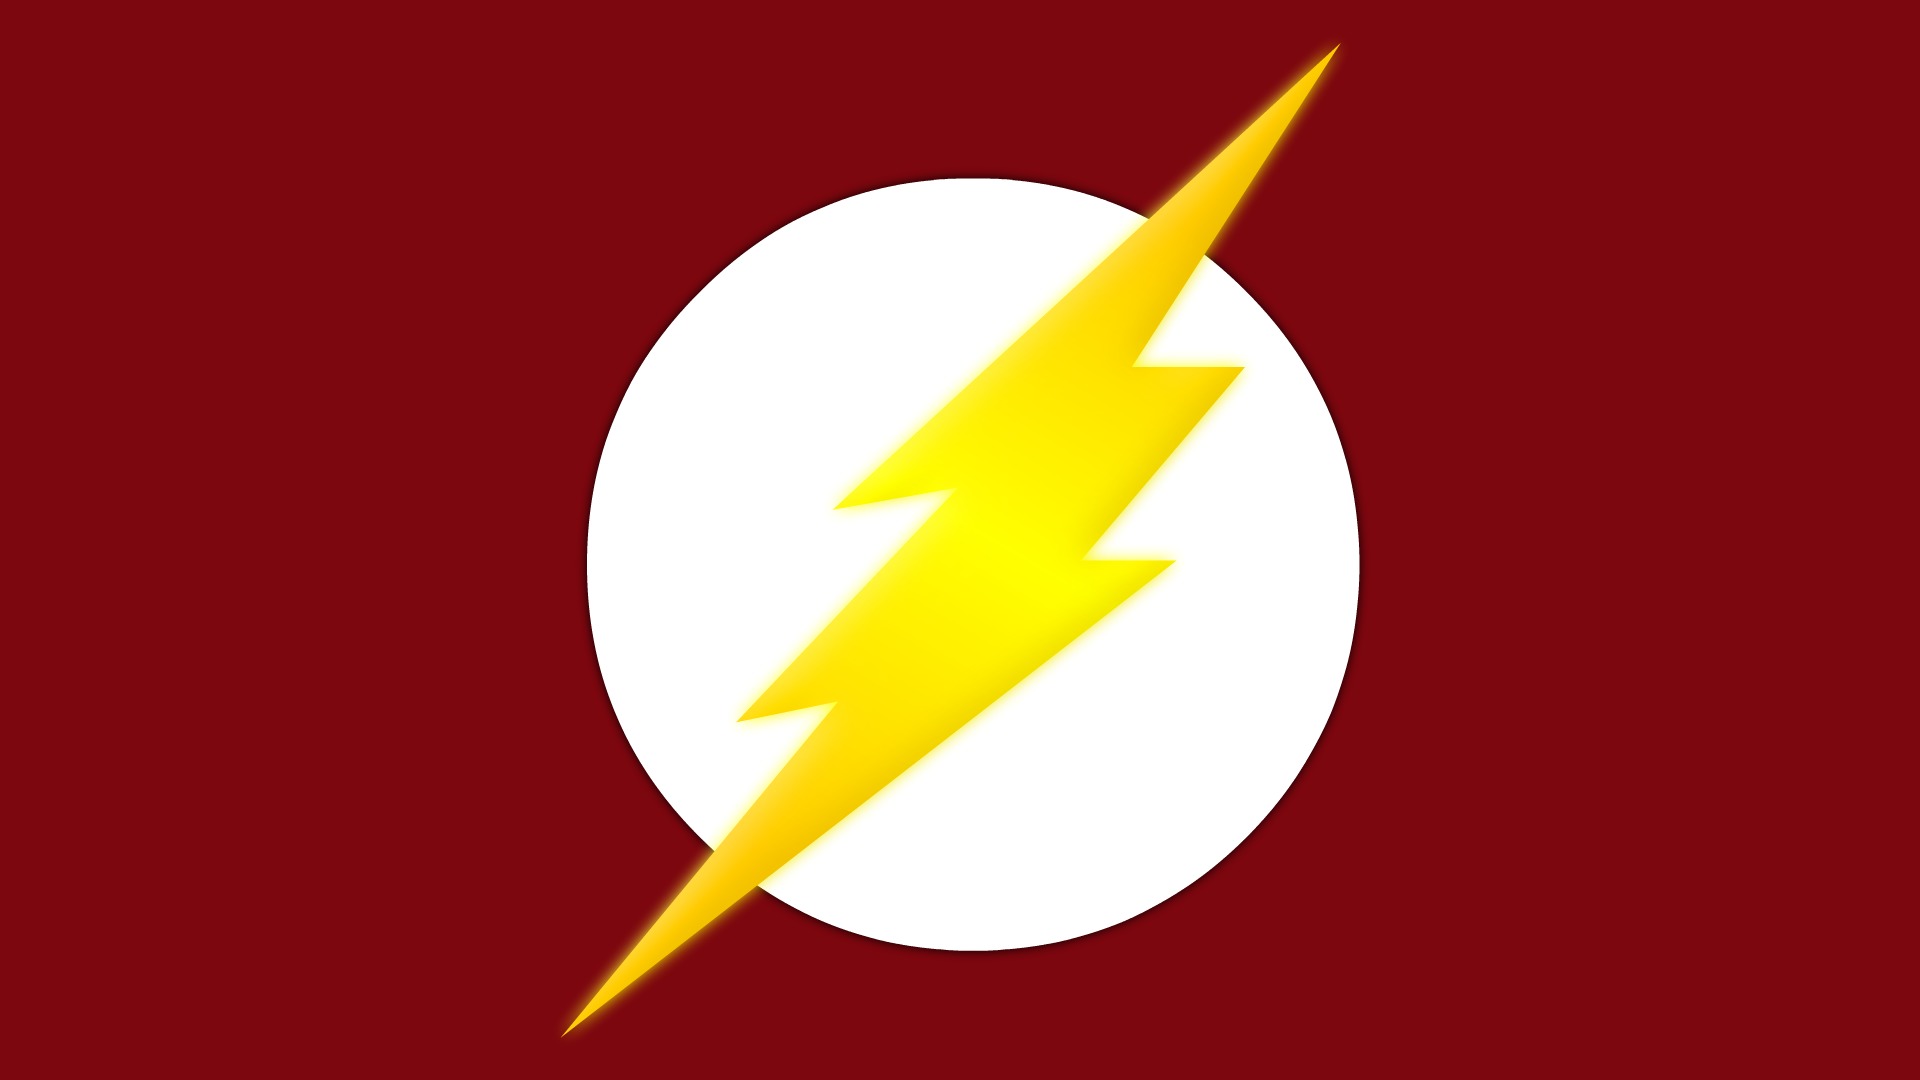 Wallpaper red, logo, lightning, symbol, comics, serial, television, The  Flash for mobile and desktop, section минимализм, resolution 1920x1080 -  download